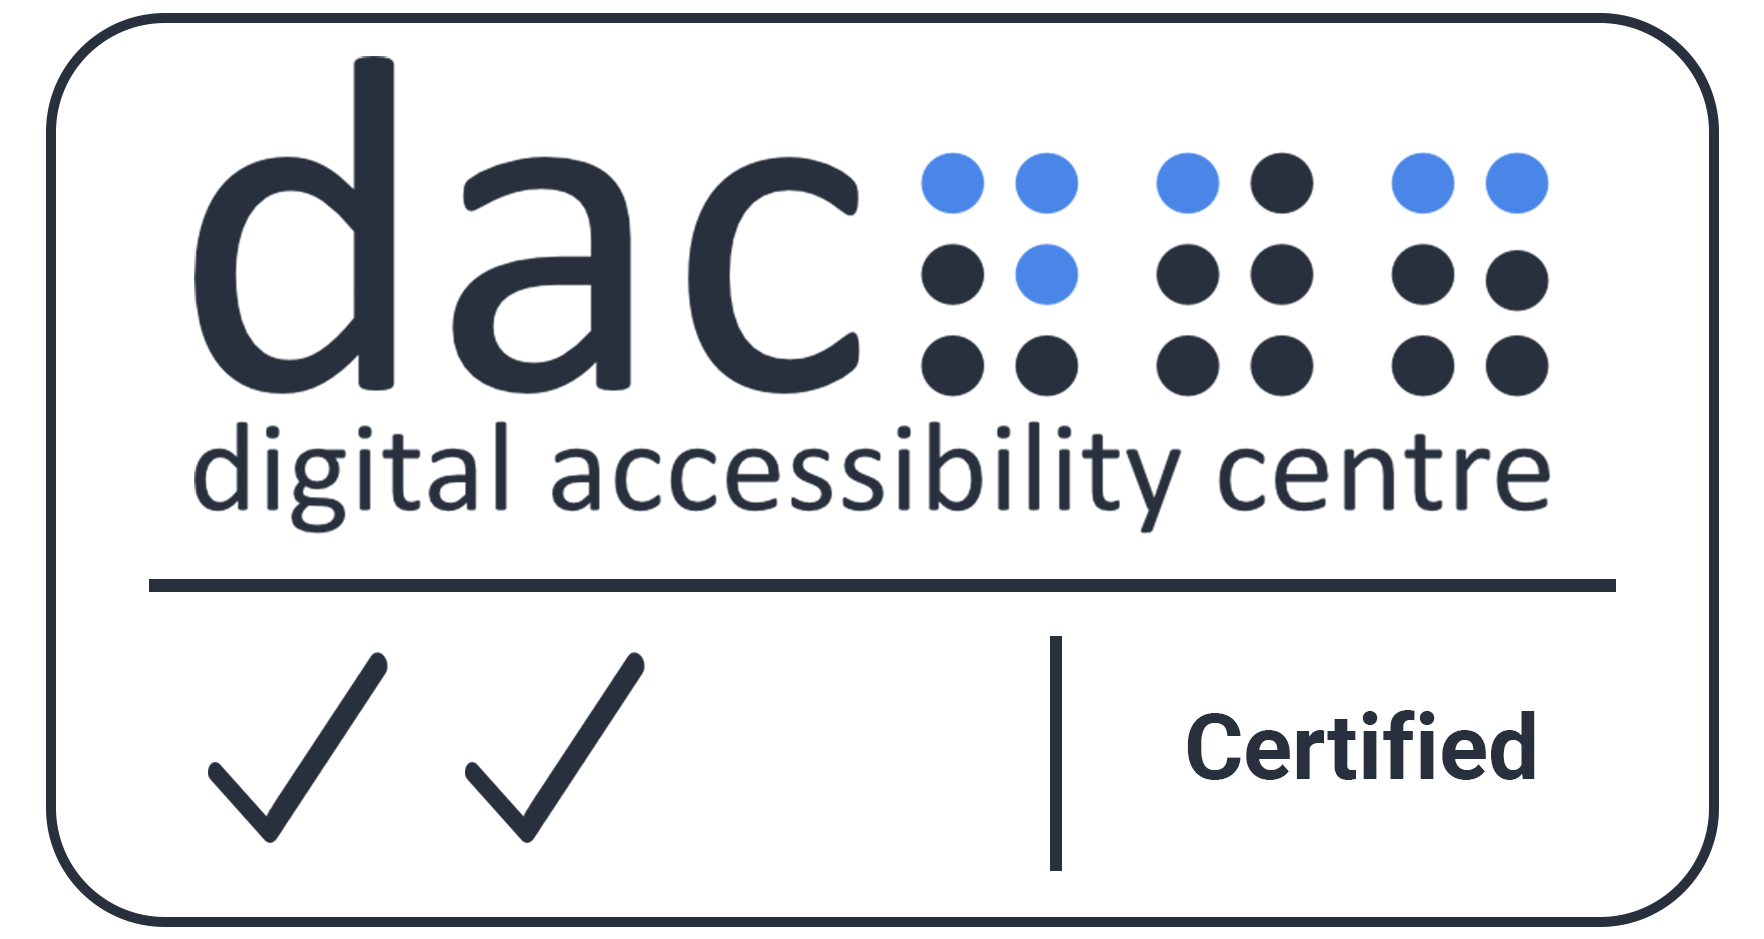 Digital Accessibility Centre Accreditation Certificate [Opens in a new window]